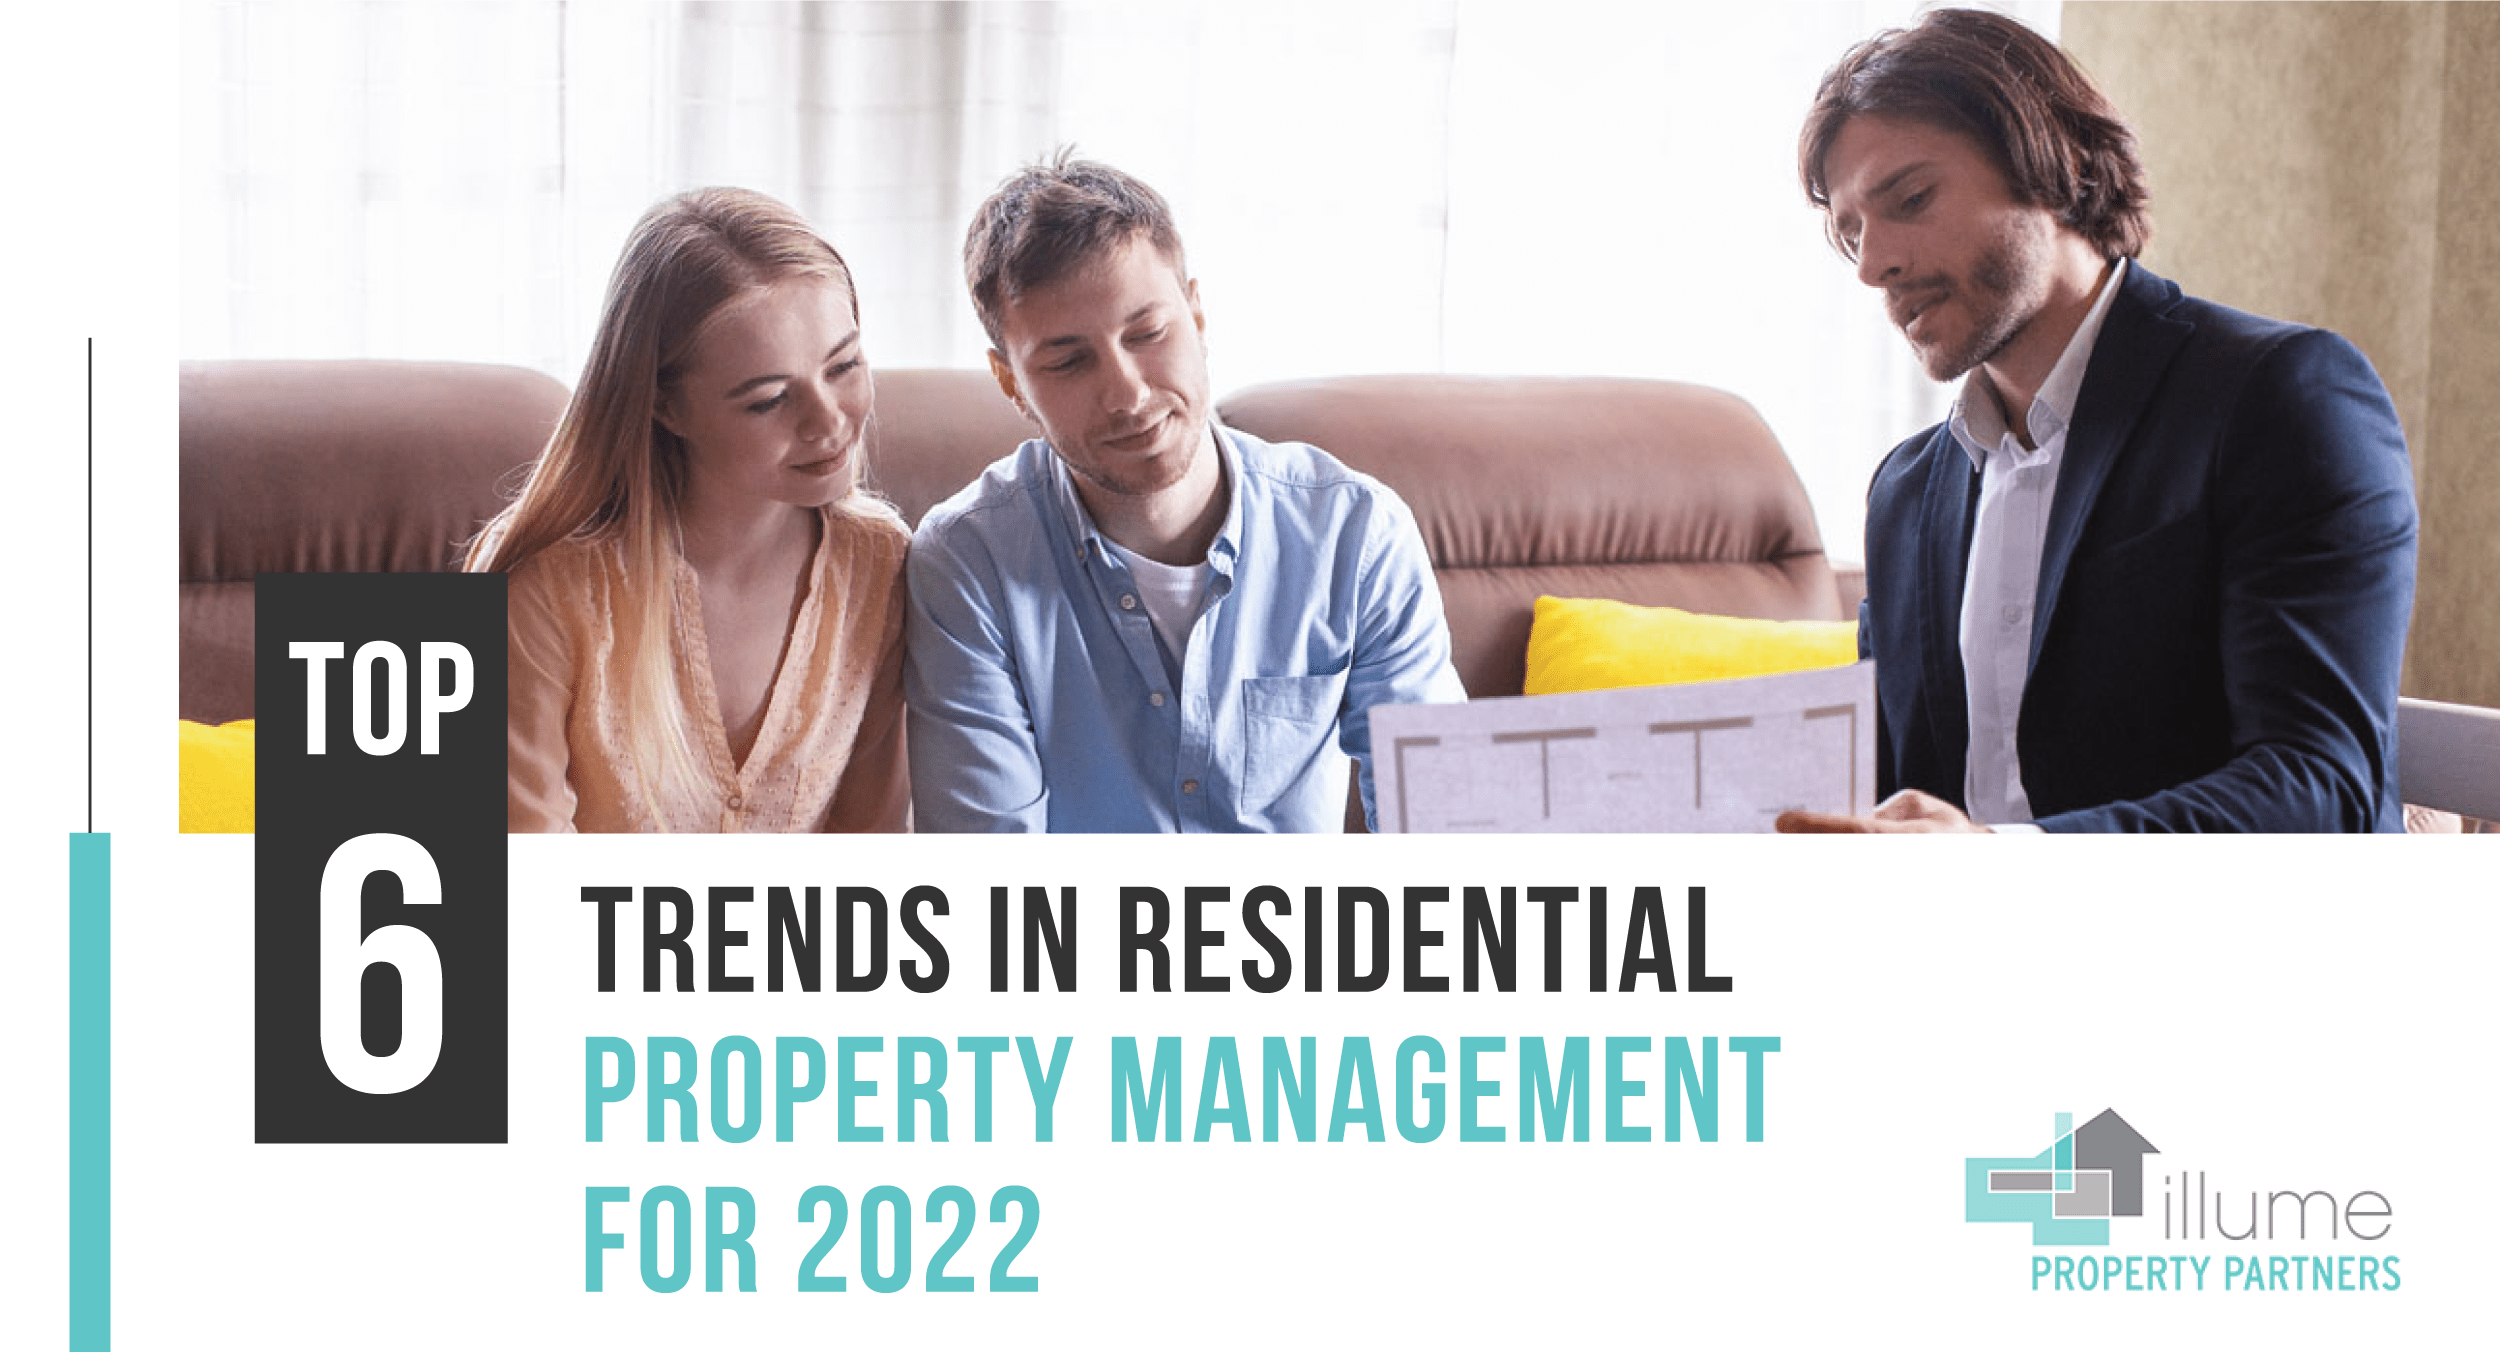 Top 6 Trends in Residential Property Management for 2022